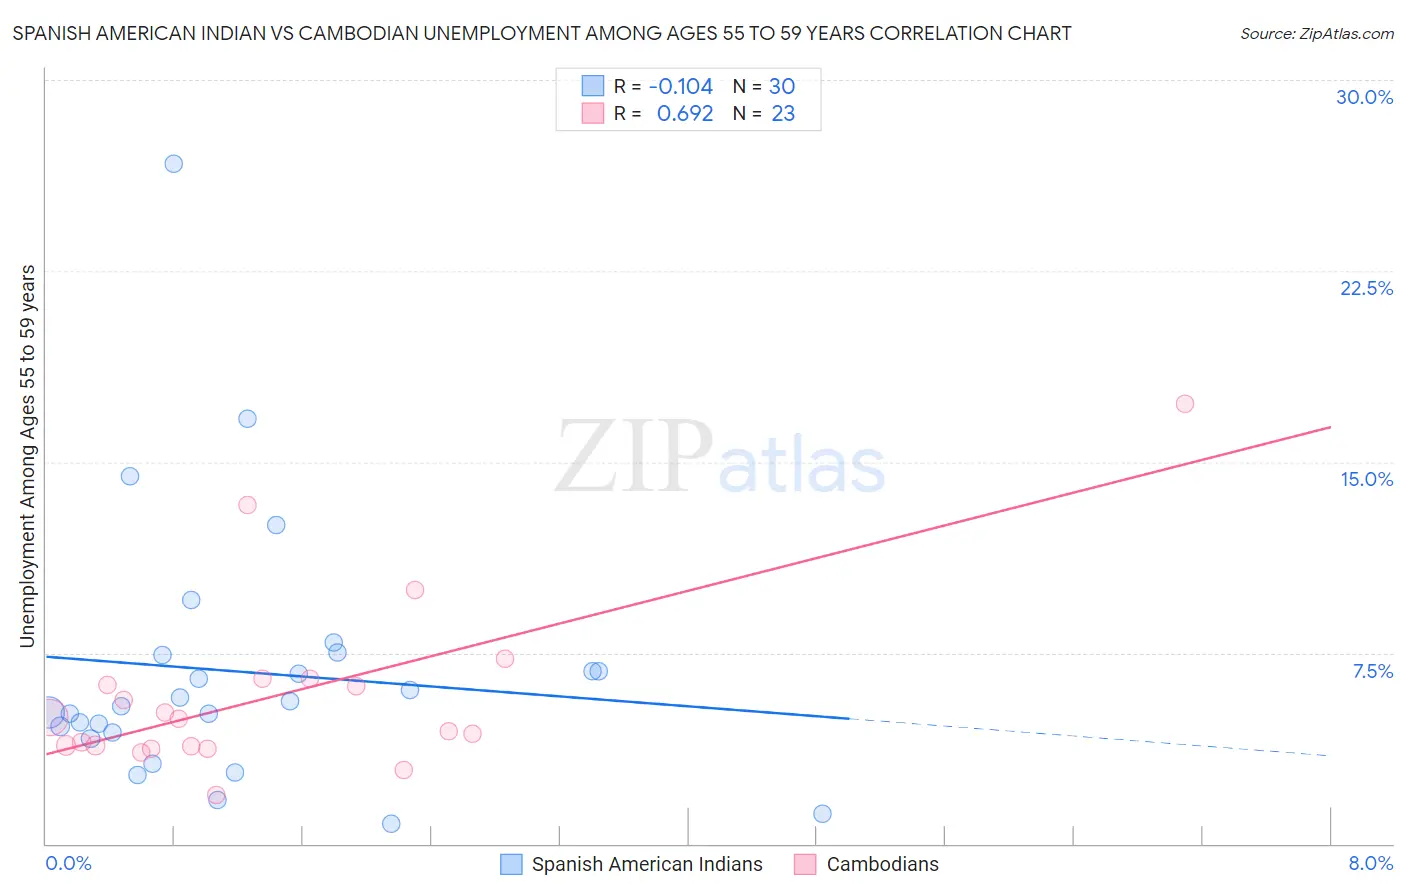 Spanish American Indian vs Cambodian Unemployment Among Ages 55 to 59 years